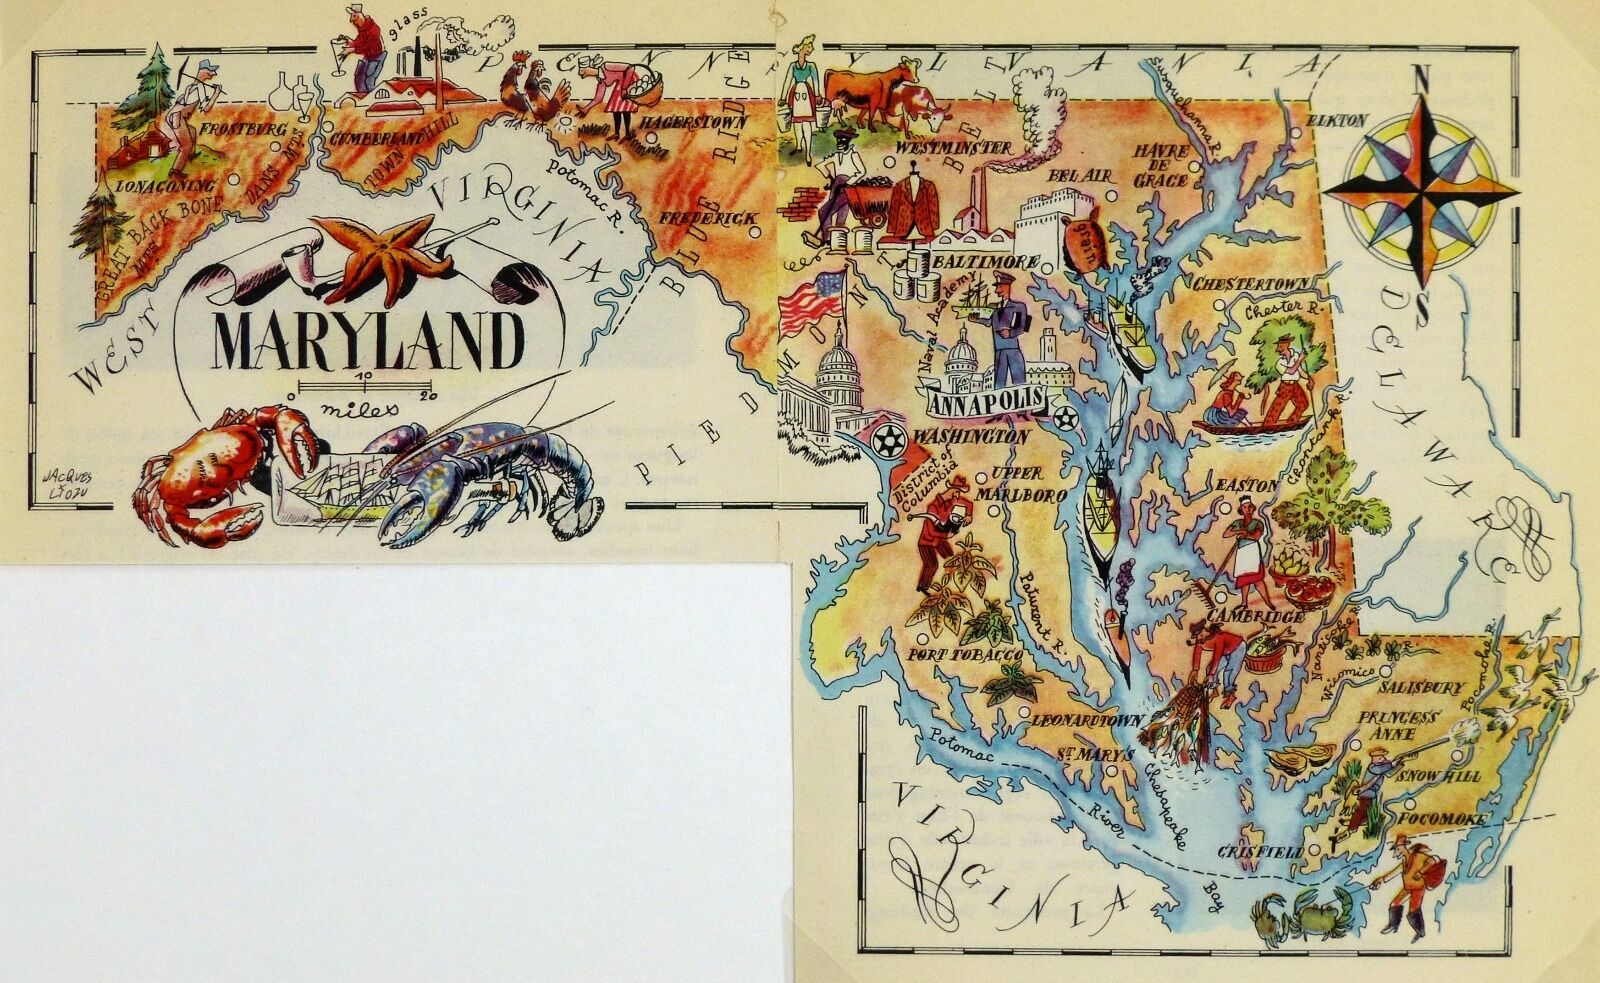 Maryland Vintage Pictorial Map (Small/Index Card size)